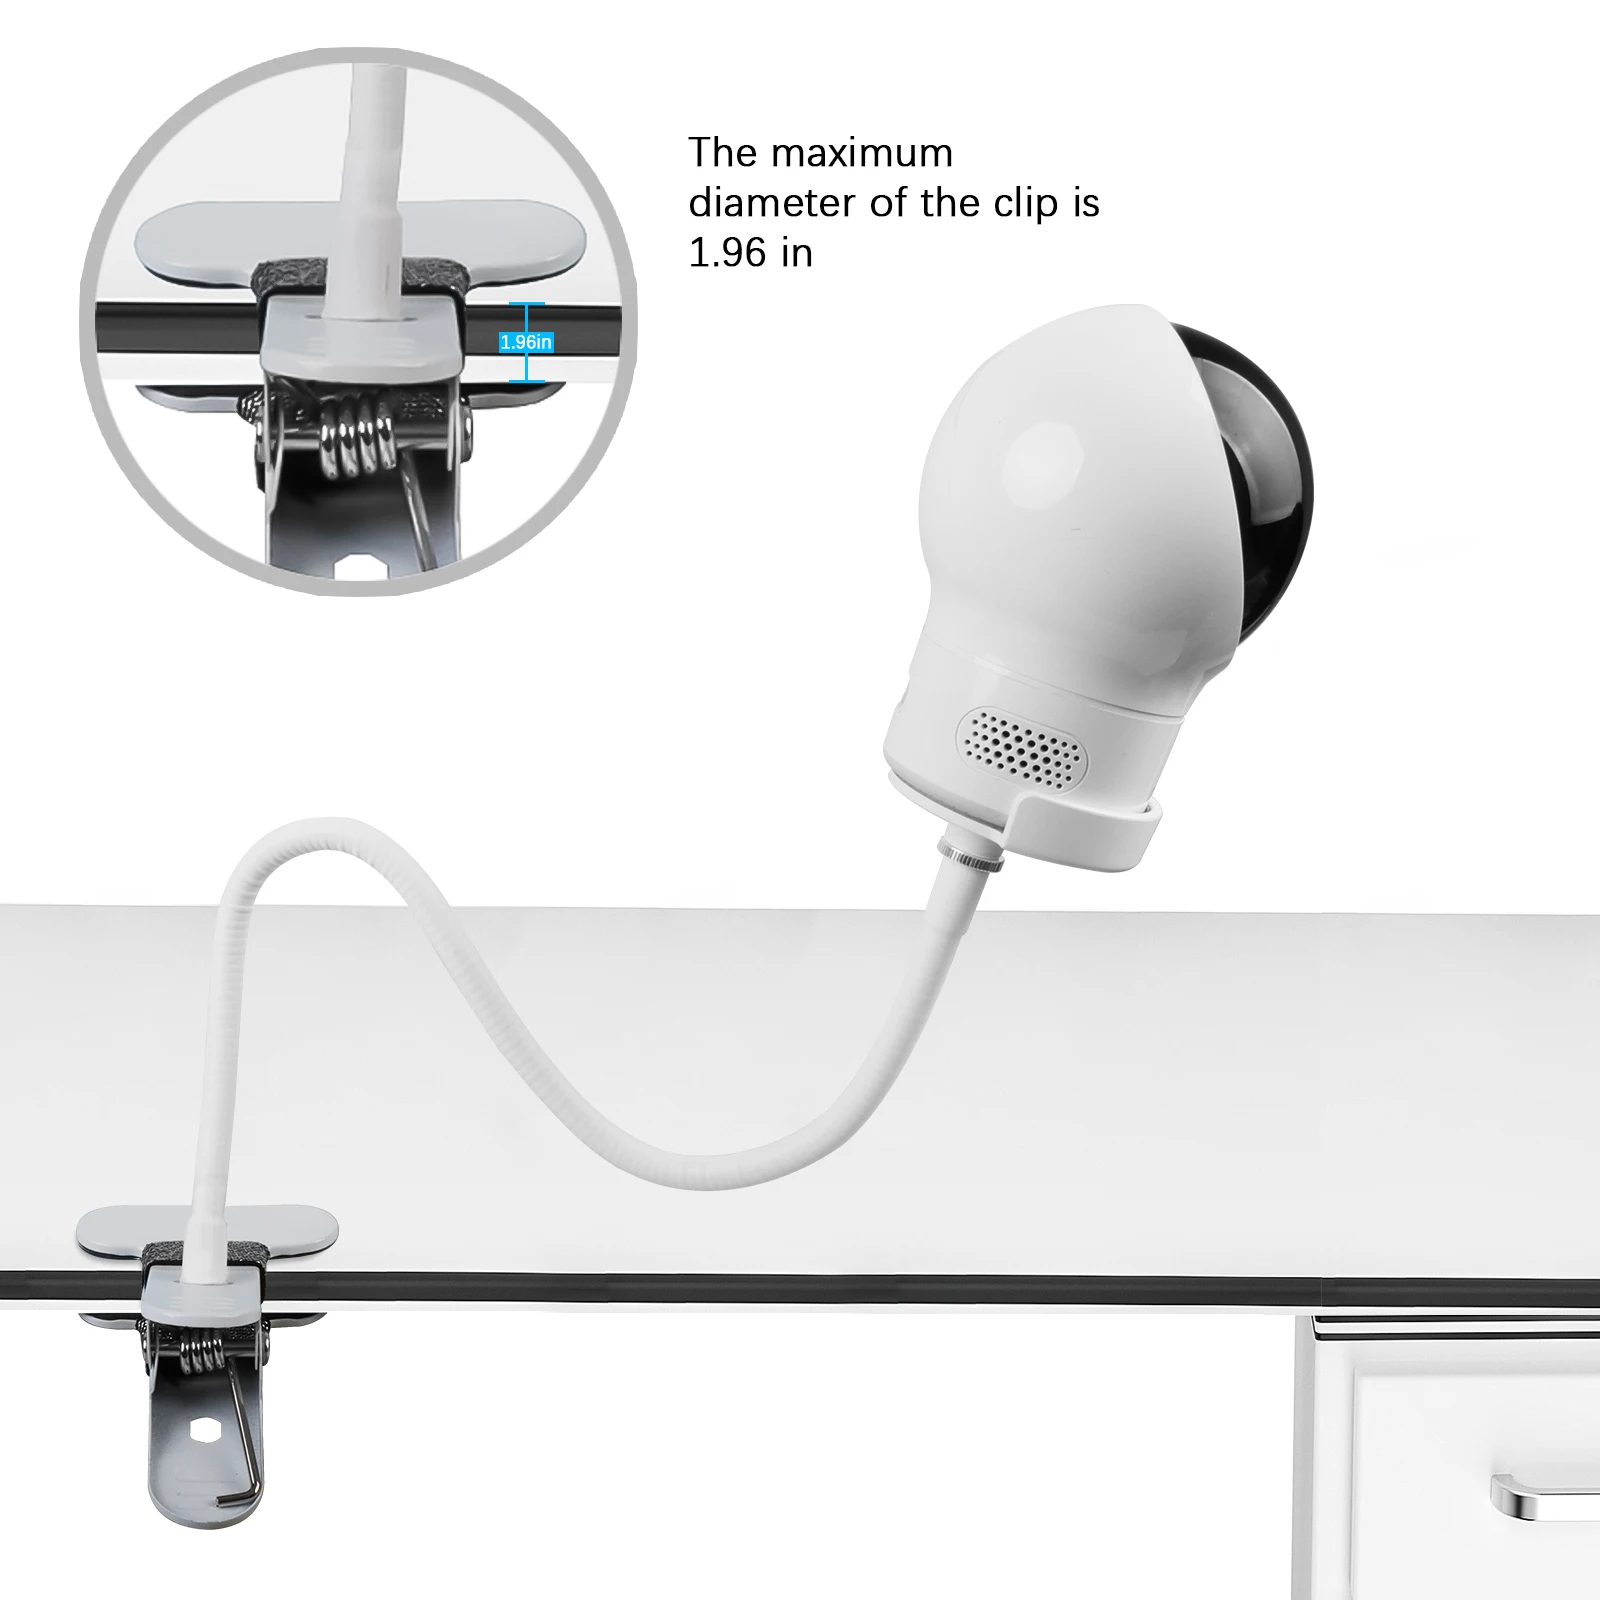 Flexible Clip Clamp Mount with Base For eufy SpaceView Video Baby Monitor Holder,Clip to Crib Cot Shelves or Furniture